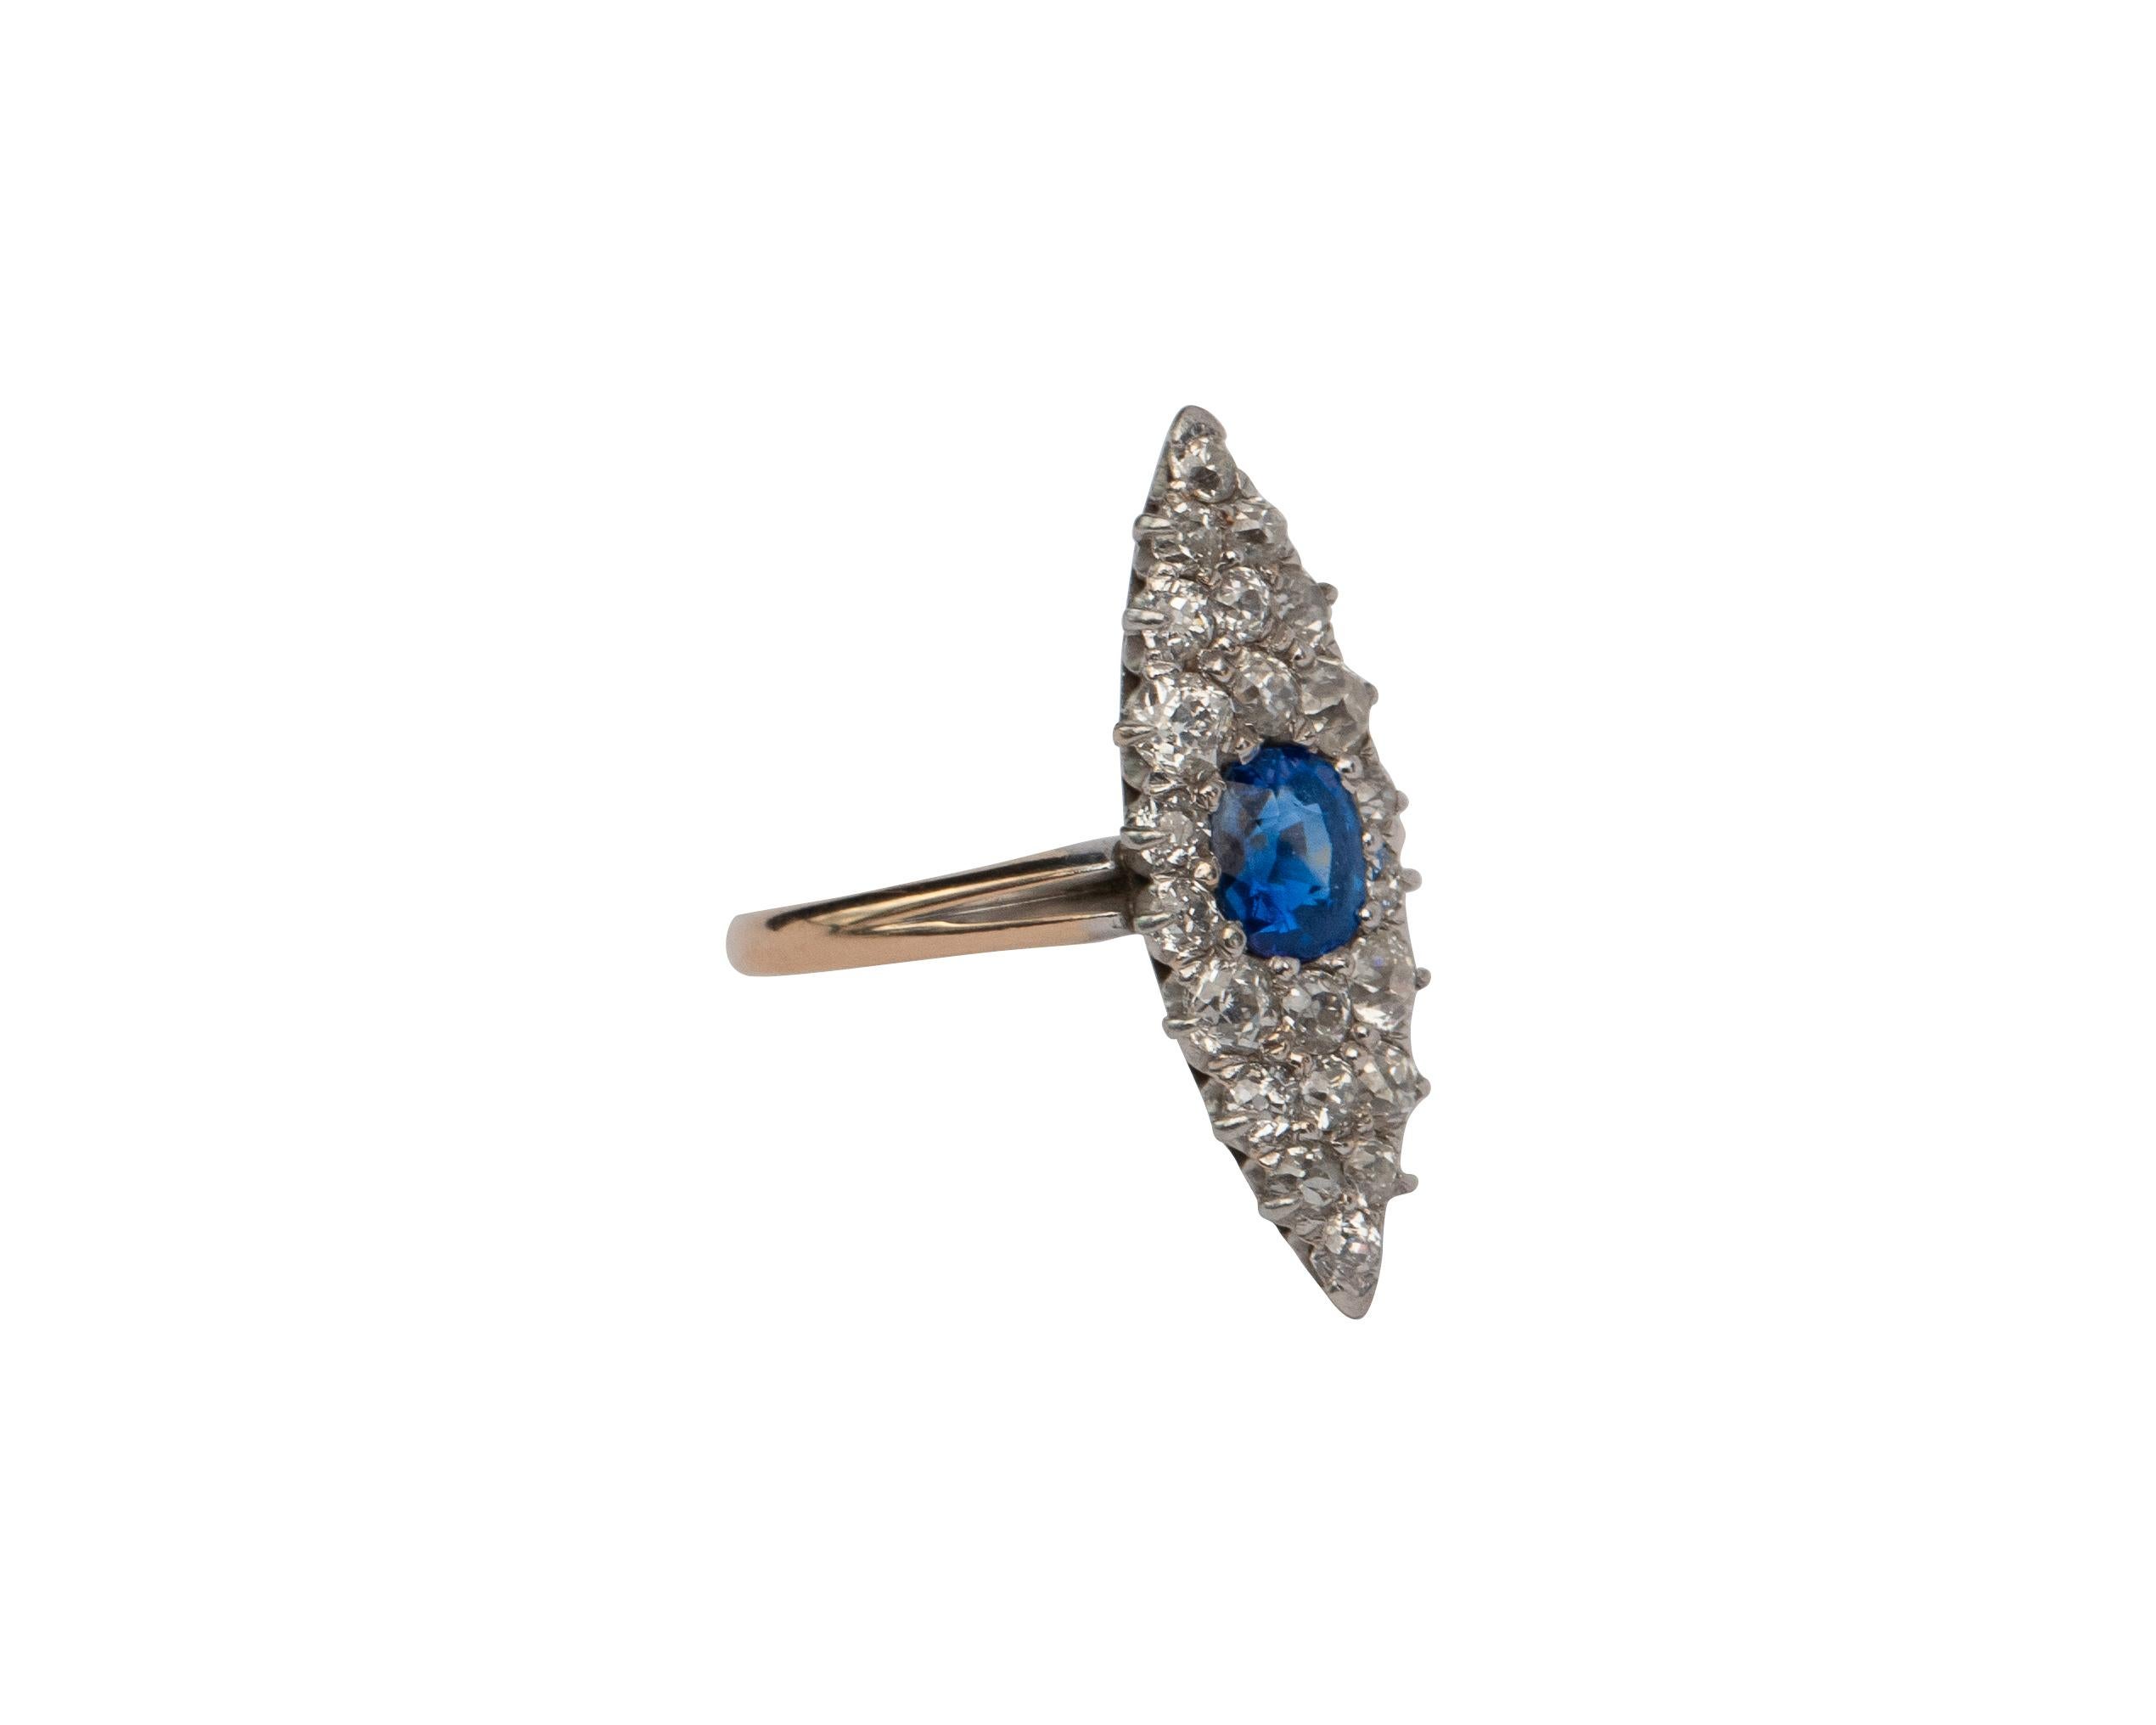 This is an exquisite example of a victorian navette marquise-shaped ring. It is crafted in yellow gold with a platinum top. The center features a dreamy natural blue sapphire of the finest quality. The sapphire in surrounded by 1.25 carats of